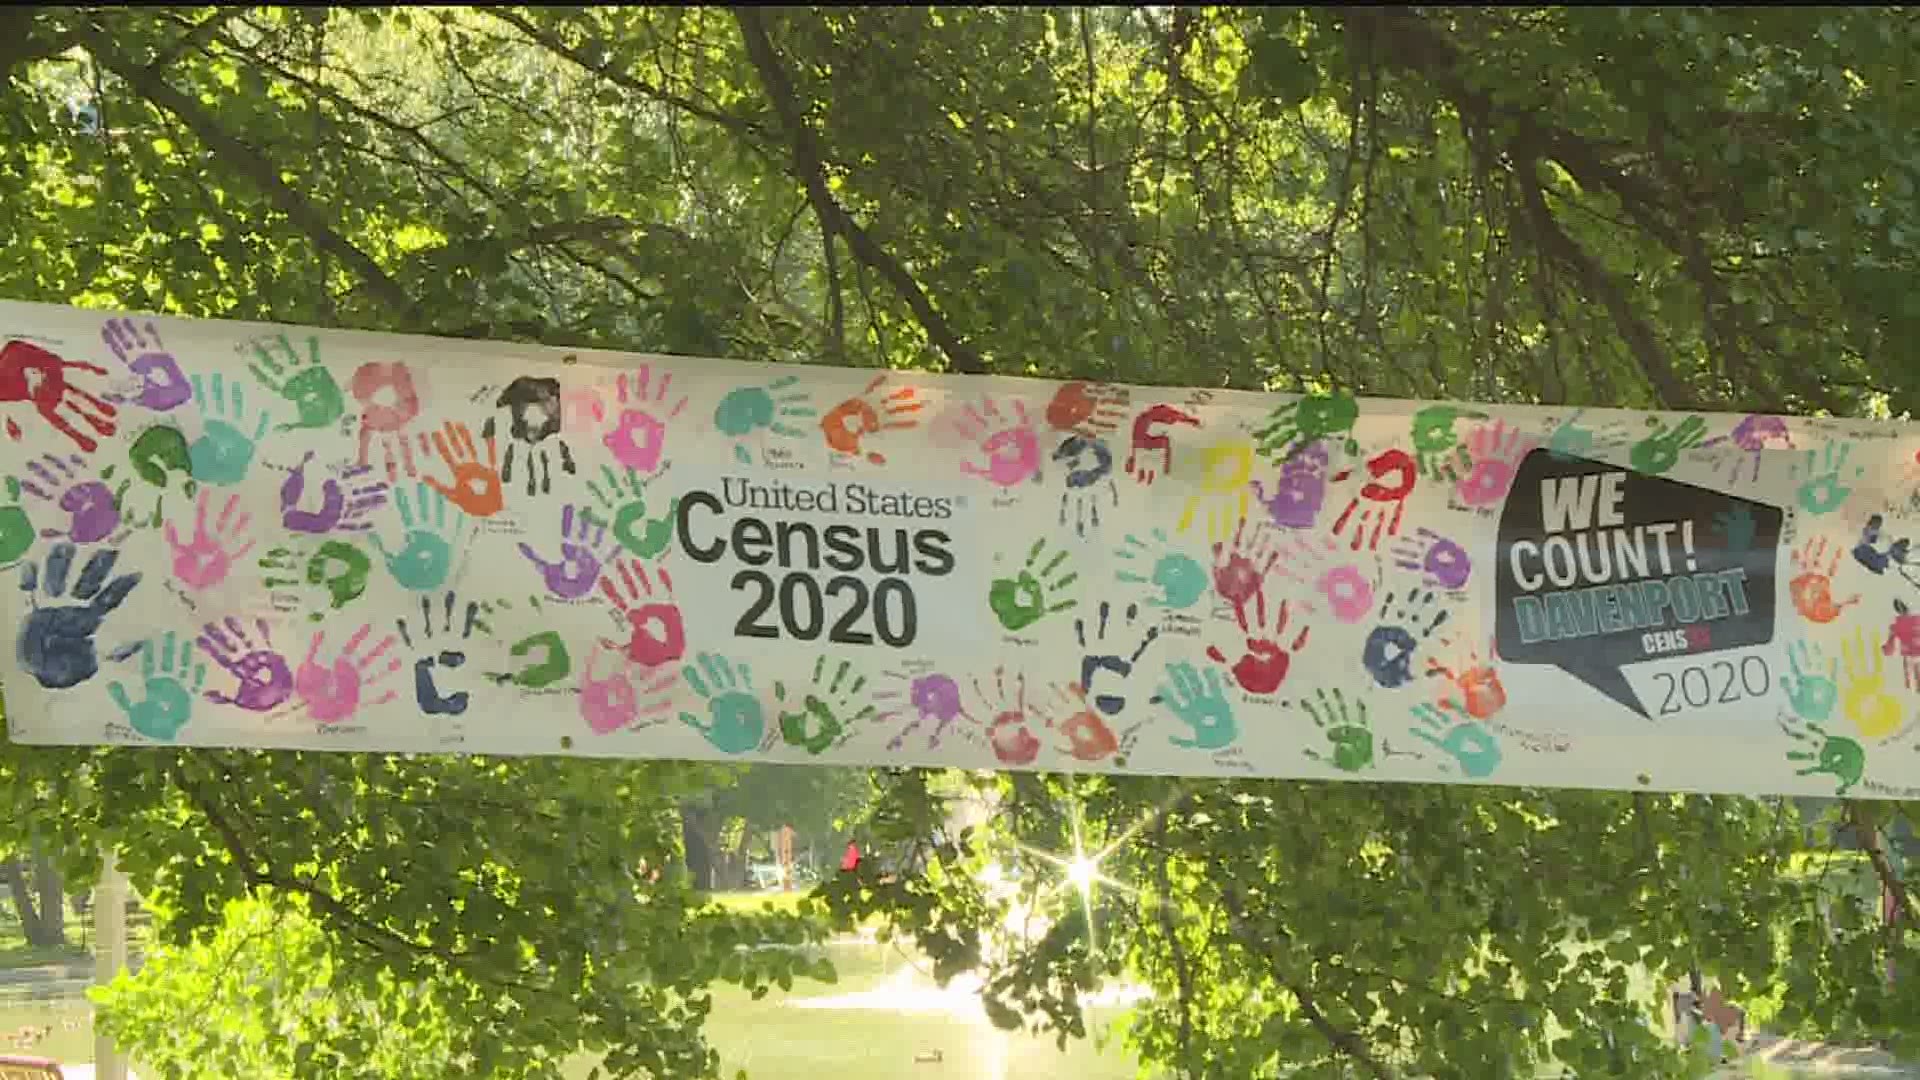 The city is working to get everyone in the Davenport community to respond to the census.